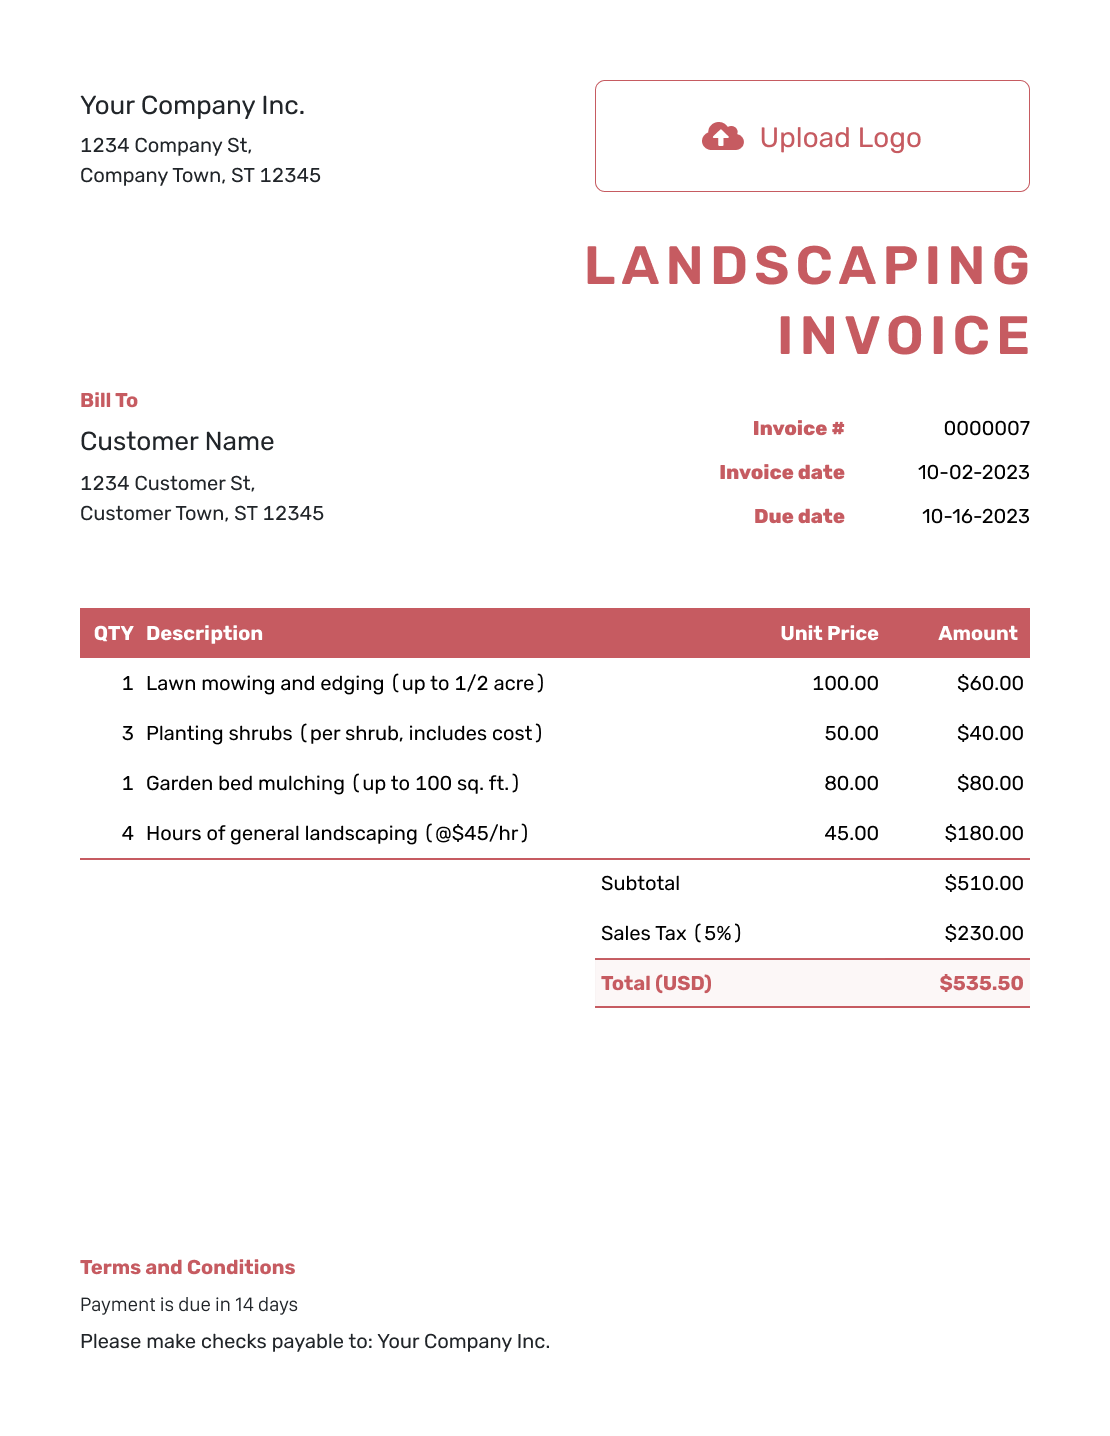 Itemized Landscaping Invoice Template